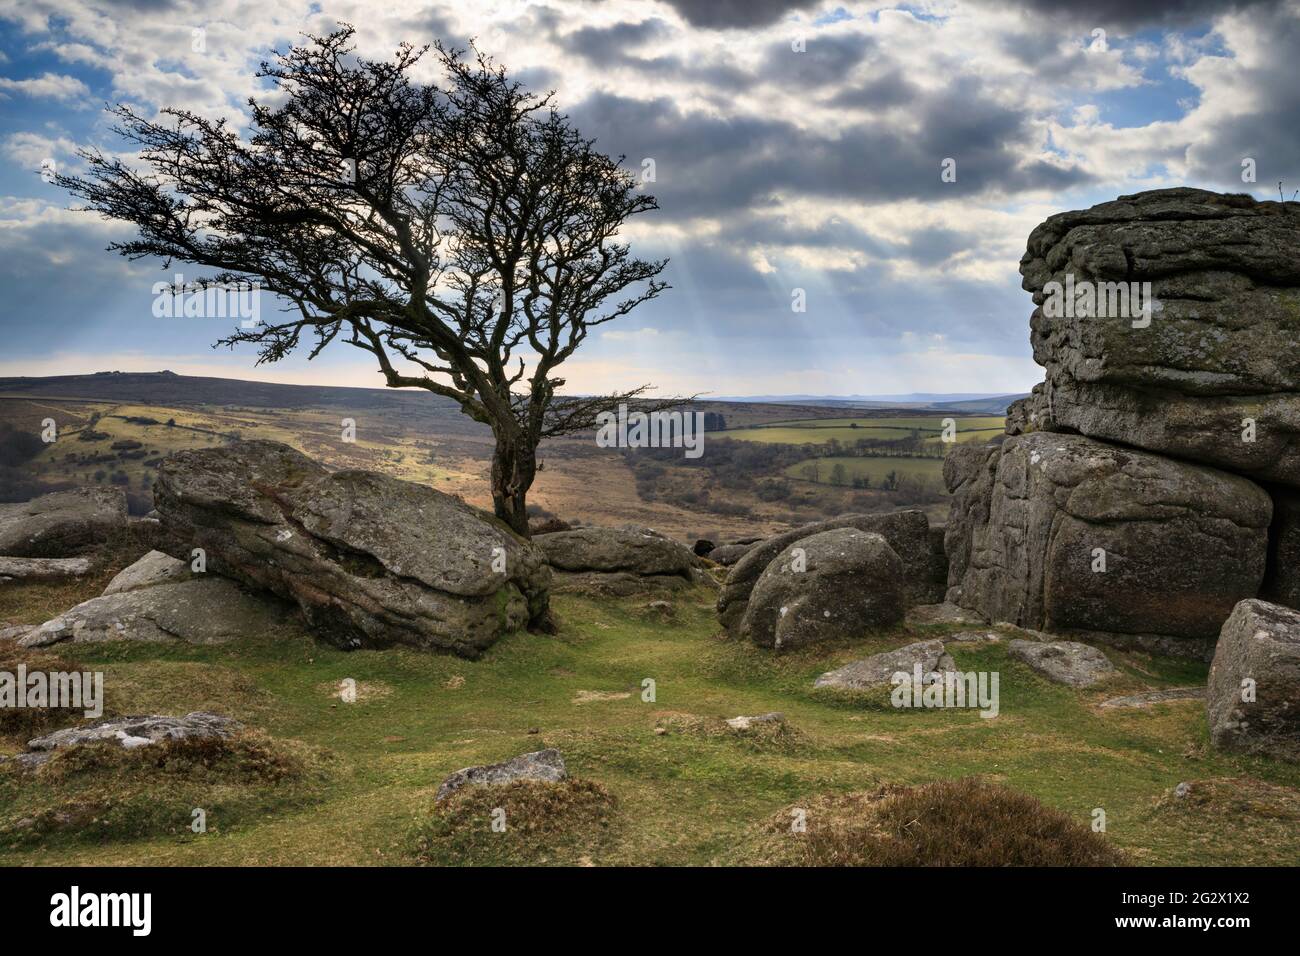 The photograph features shafts of sunlight behind the lone hawthorn tree at Emsworthy Rocks, near Saddle Tor in the Dartmoor National Park in Devon. Stock Photo